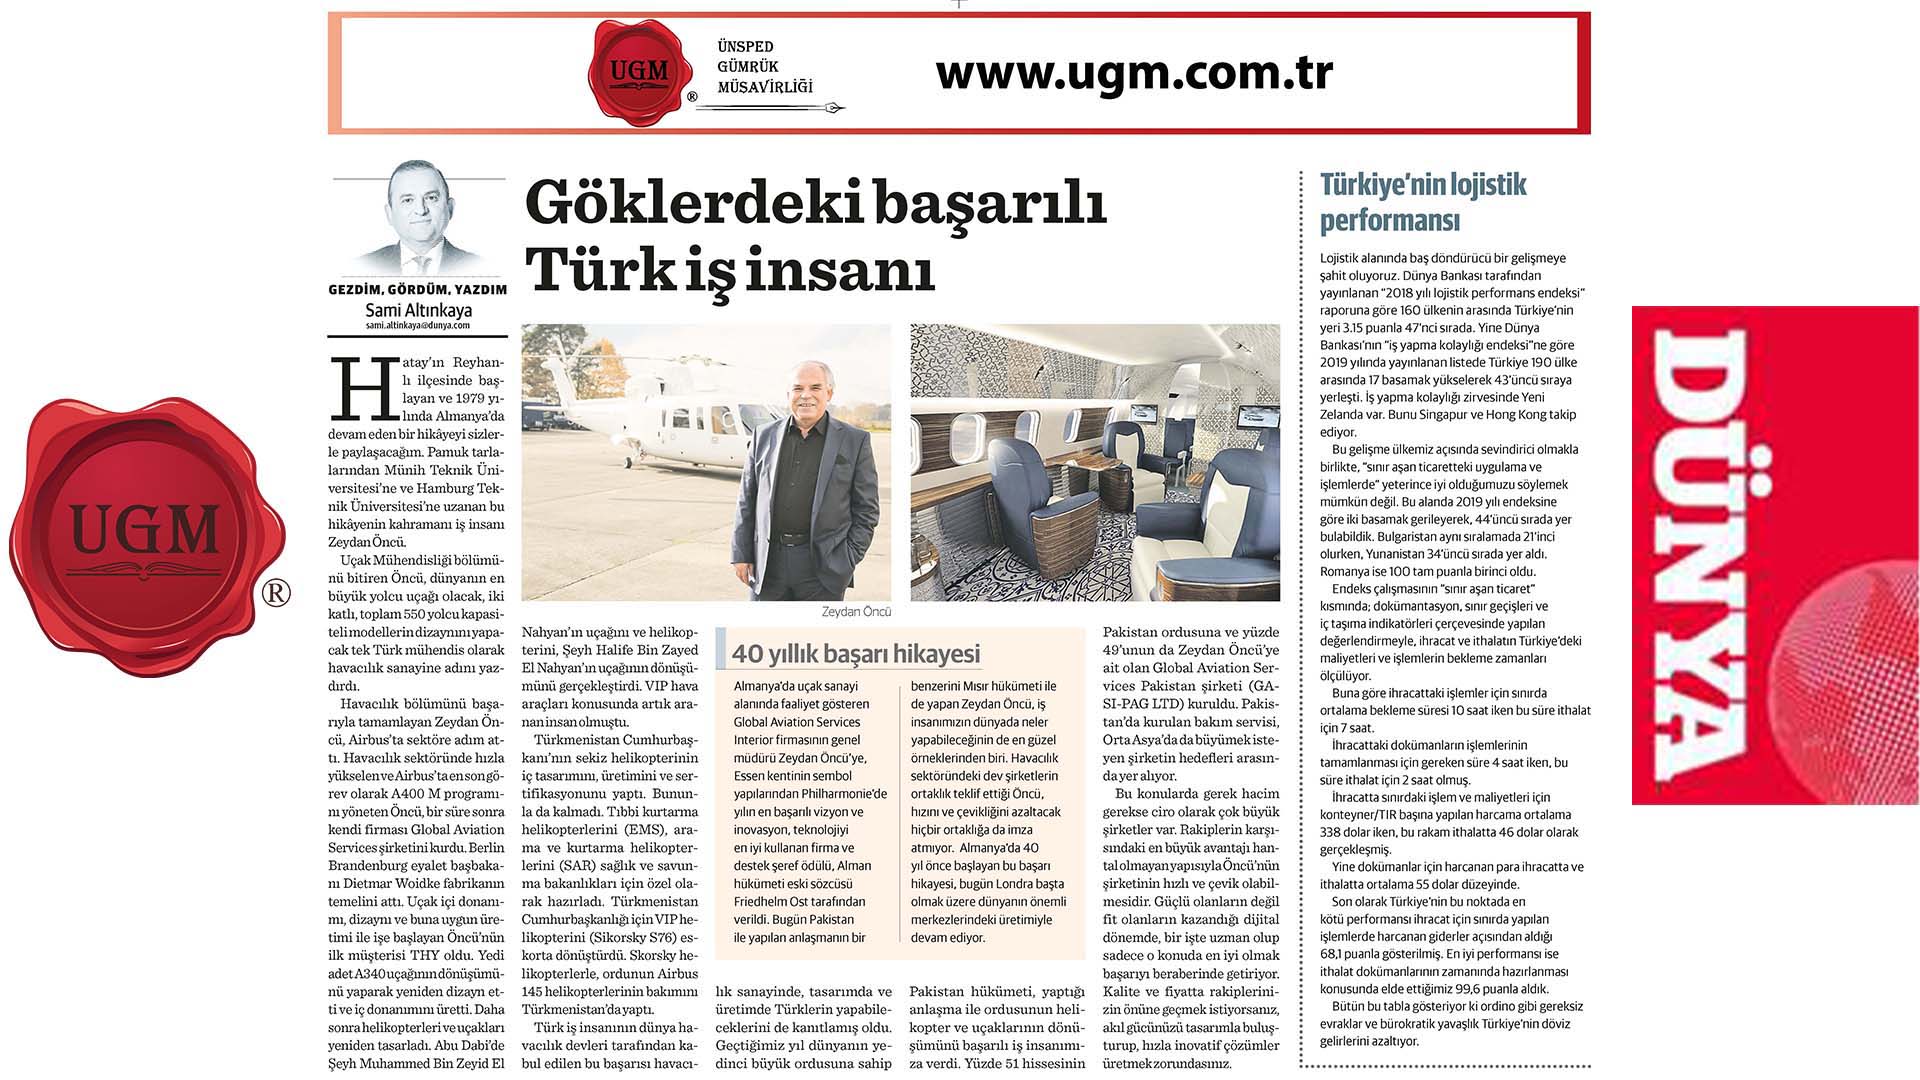 UGM Corporate Communications Director Mr. Sami ALTINKAYA appeared in Dünya Newspaper with an Interview with Mr. Zeydan ÖNCÜ on "Successful Turkish Business Person in the Sky".